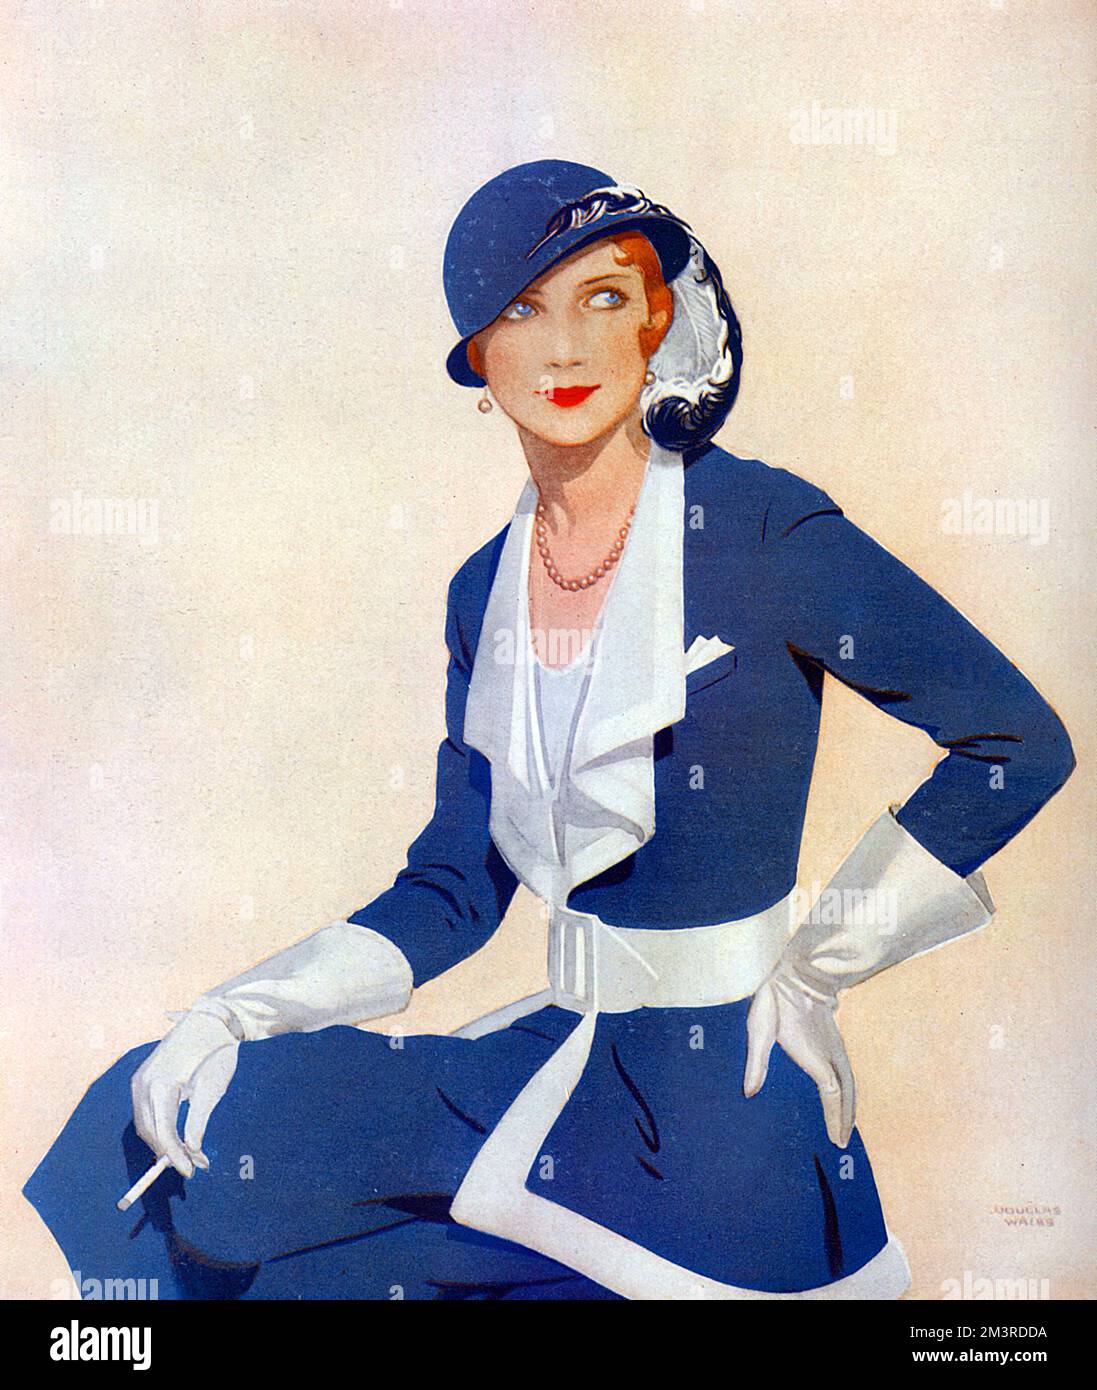 Beautifully composed illustration of a woman wearing a striking blue outfit, including a glengarry style bowler hat with a curling ostrich feather.       Date: 1931 Stock Photo